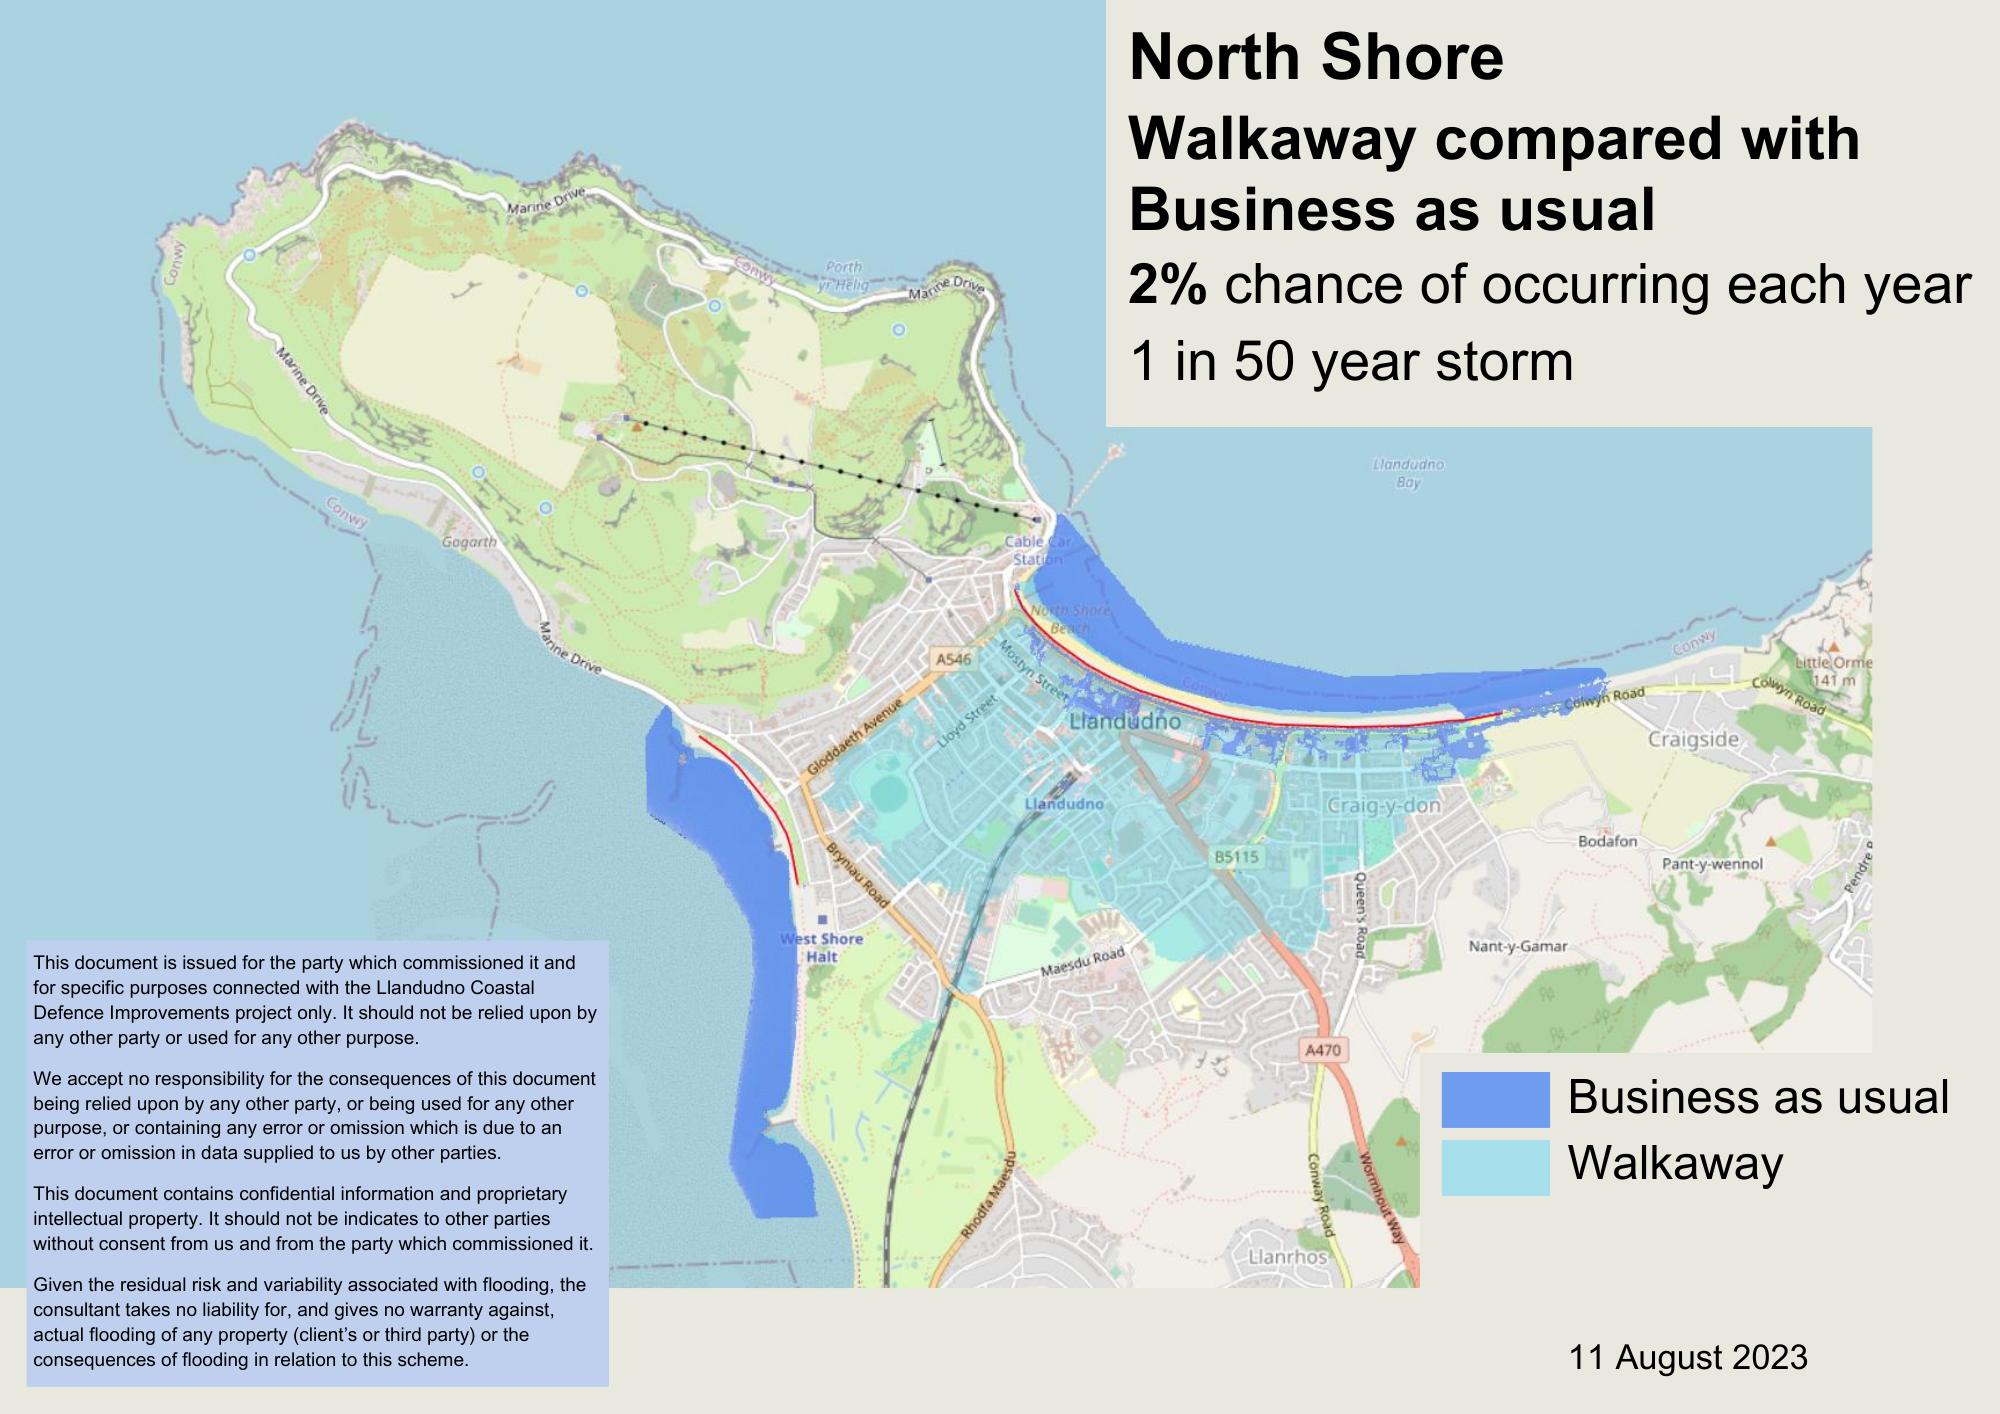 North Shore - Walkaway compared with business as usual in the 2% chance of flooding each year (1 in 50 years) scenario